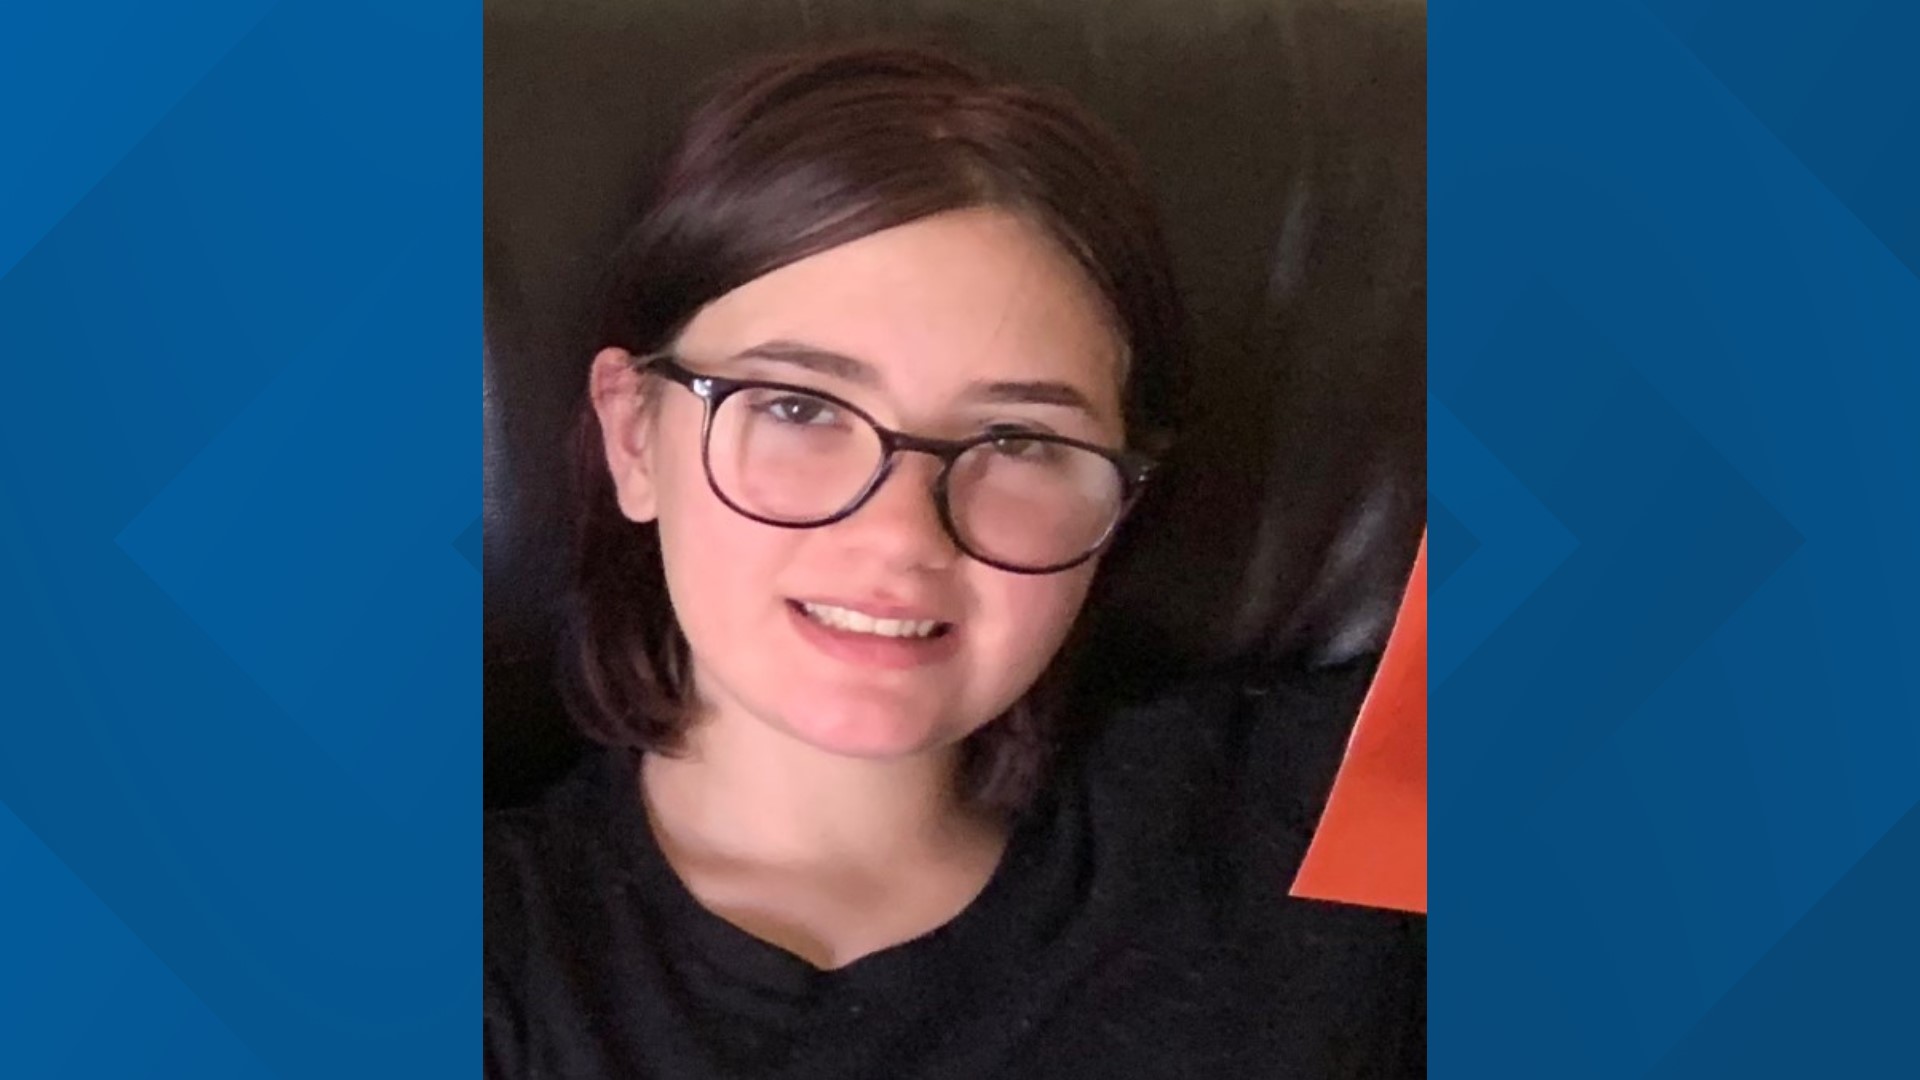 An AMBER Alert has been issued for 11-year-old Lilly Ingalsbe, who left her Westminster home to go to a park Tuesday afternoon and failed to return home.